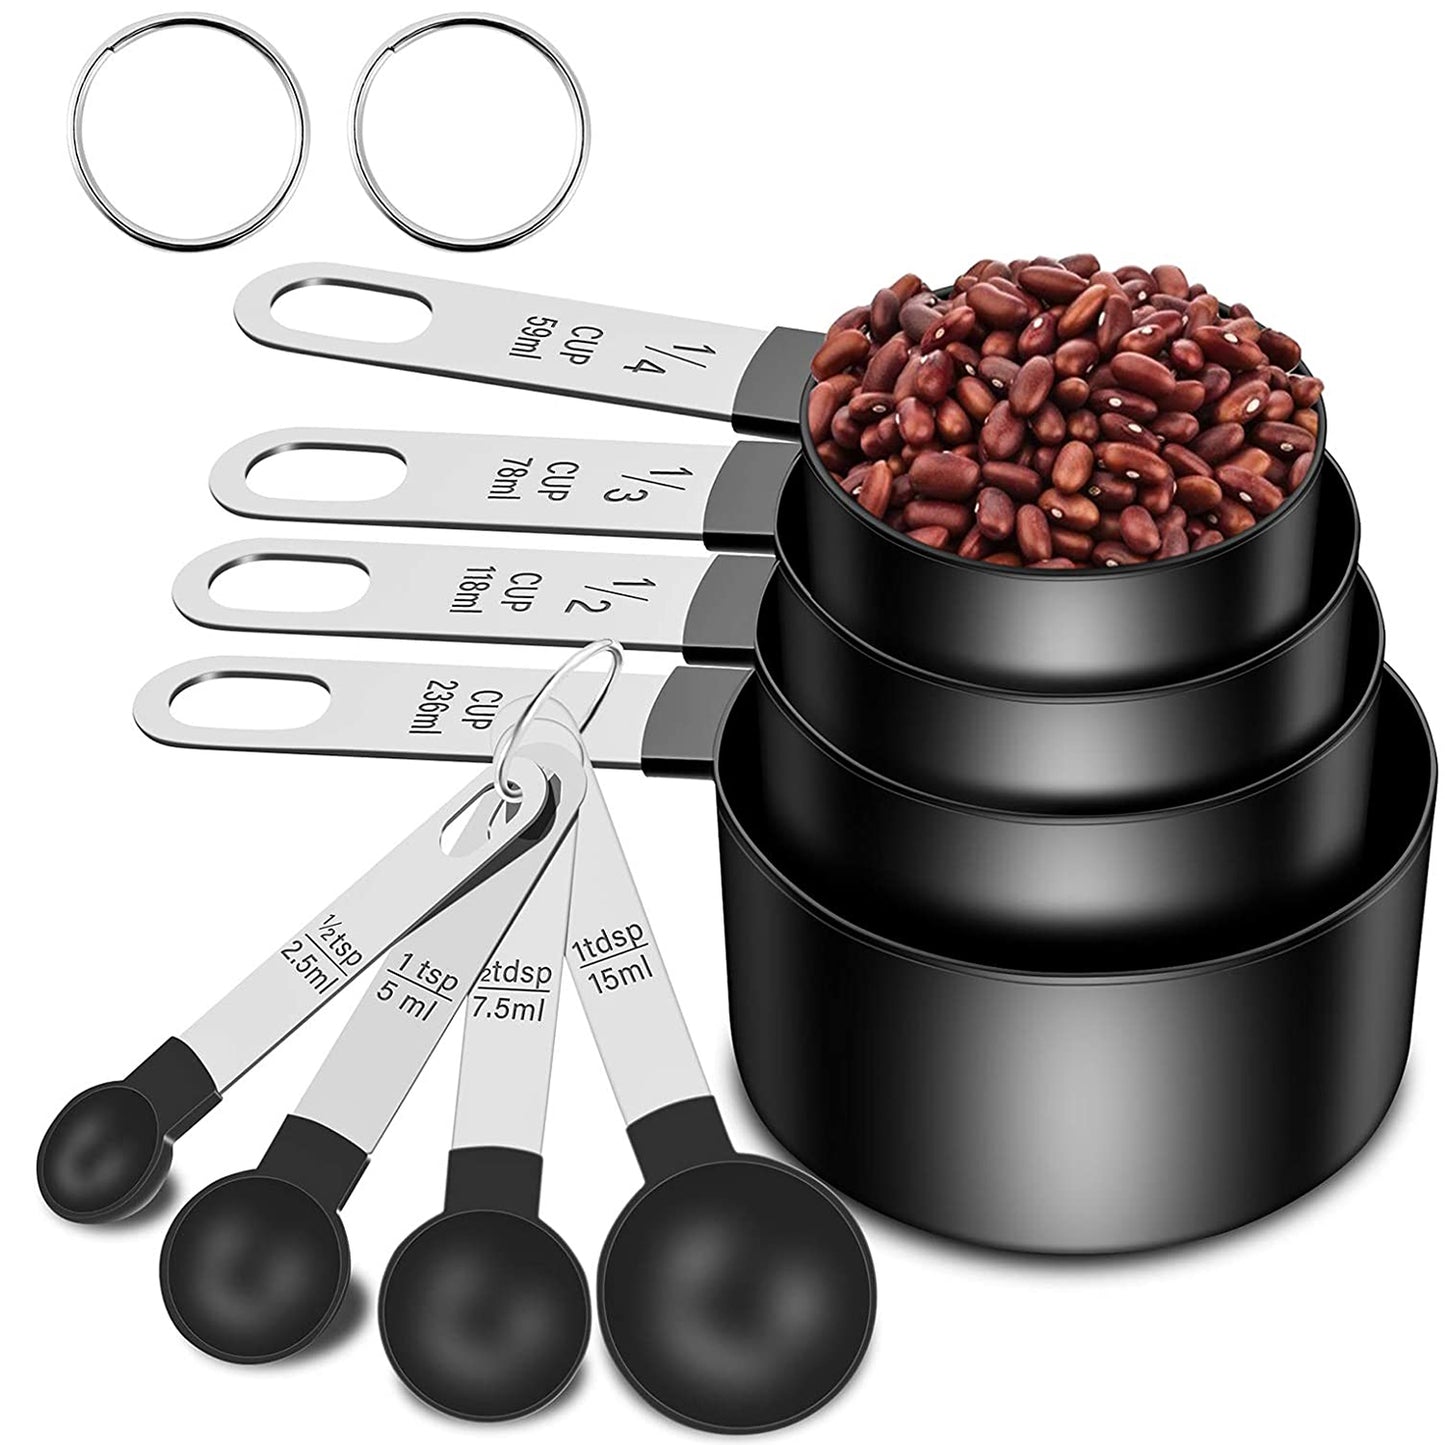 SYNGAR Measuring Cups and Spoons Set, Nesting Measure Cups with Stainless Steel Handle, Home Essentials Measuring 4 Cups and 4 Spoons for Baking, Cooking, Teaspoons Set, Black